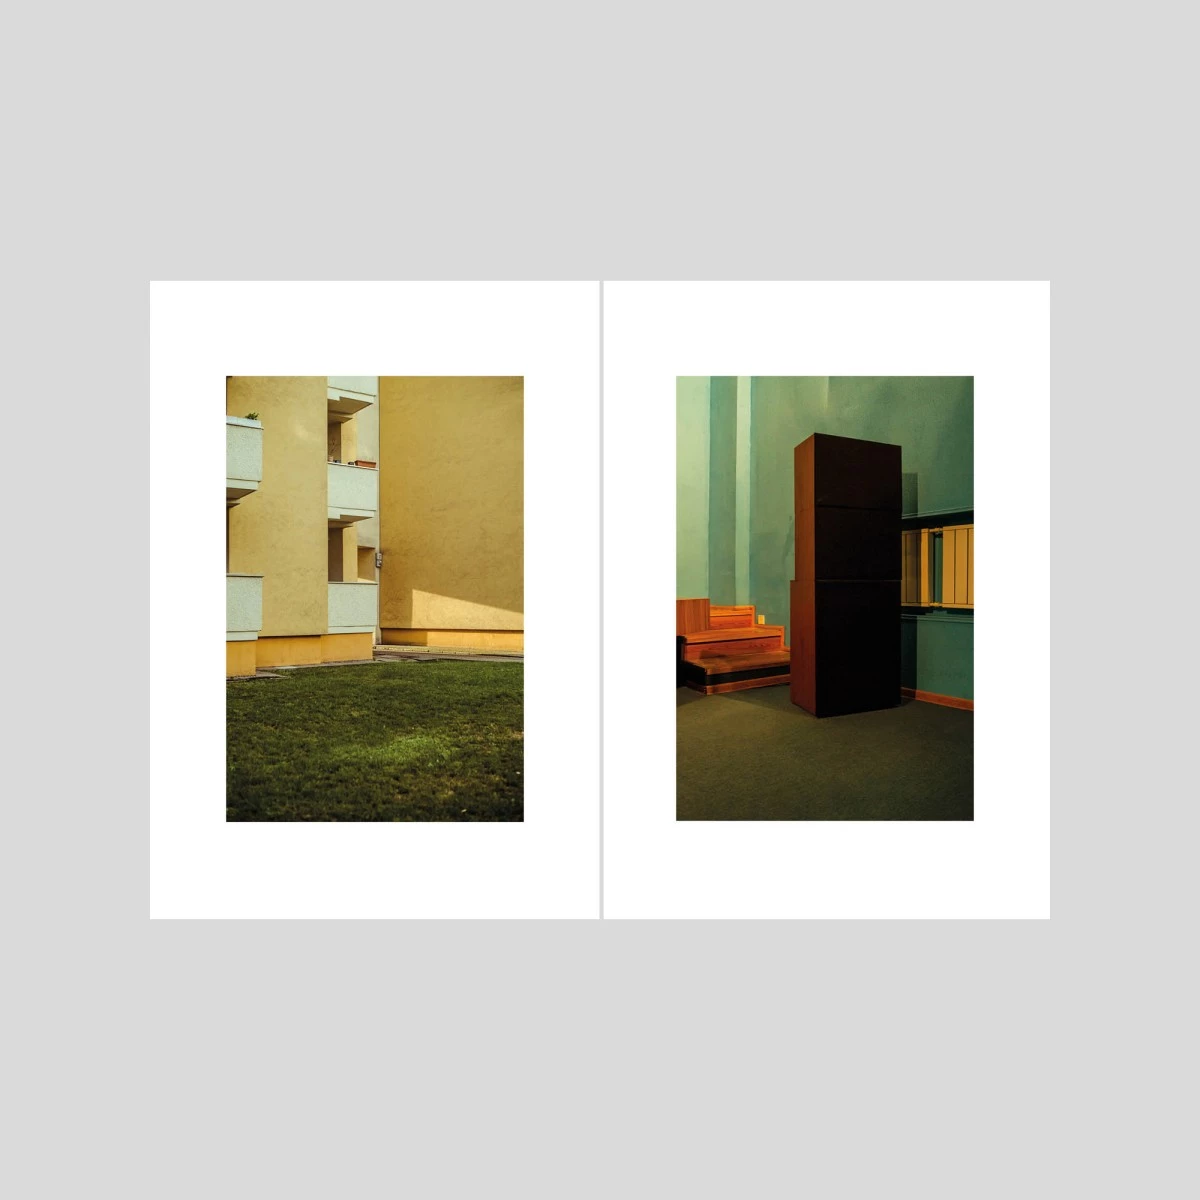 Cover of the photo zine Vertical street by Janko Bosch